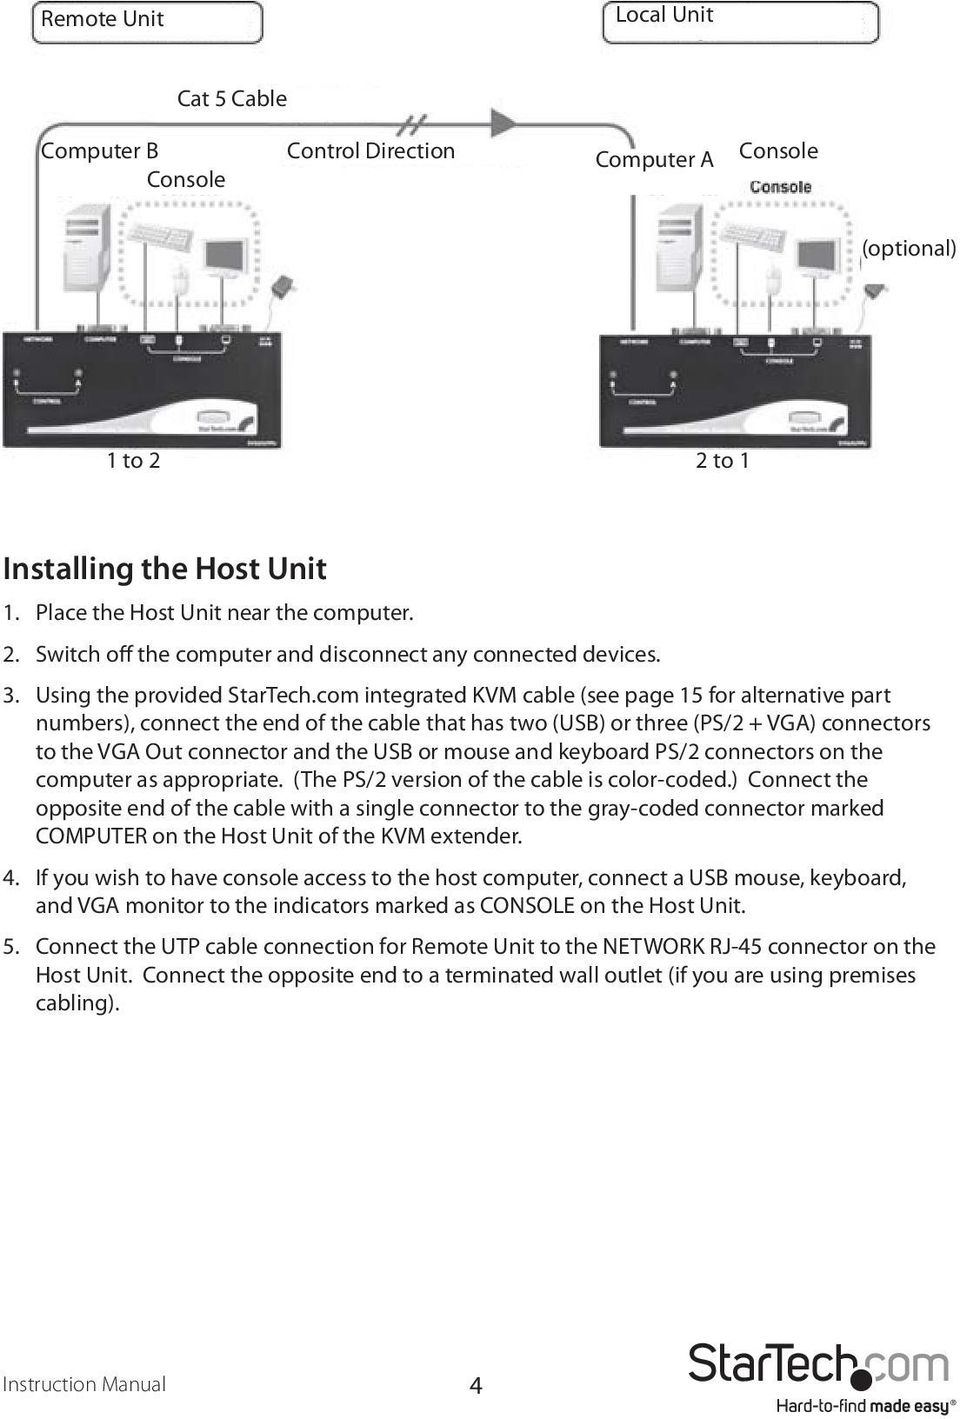 com integrated KVM cable (see page 15 for alternative part numbers), connect the end of the cable that has two (USB) or three (PS/2 + VGA) connectors to the VGA Out connector and the USB or mouse and